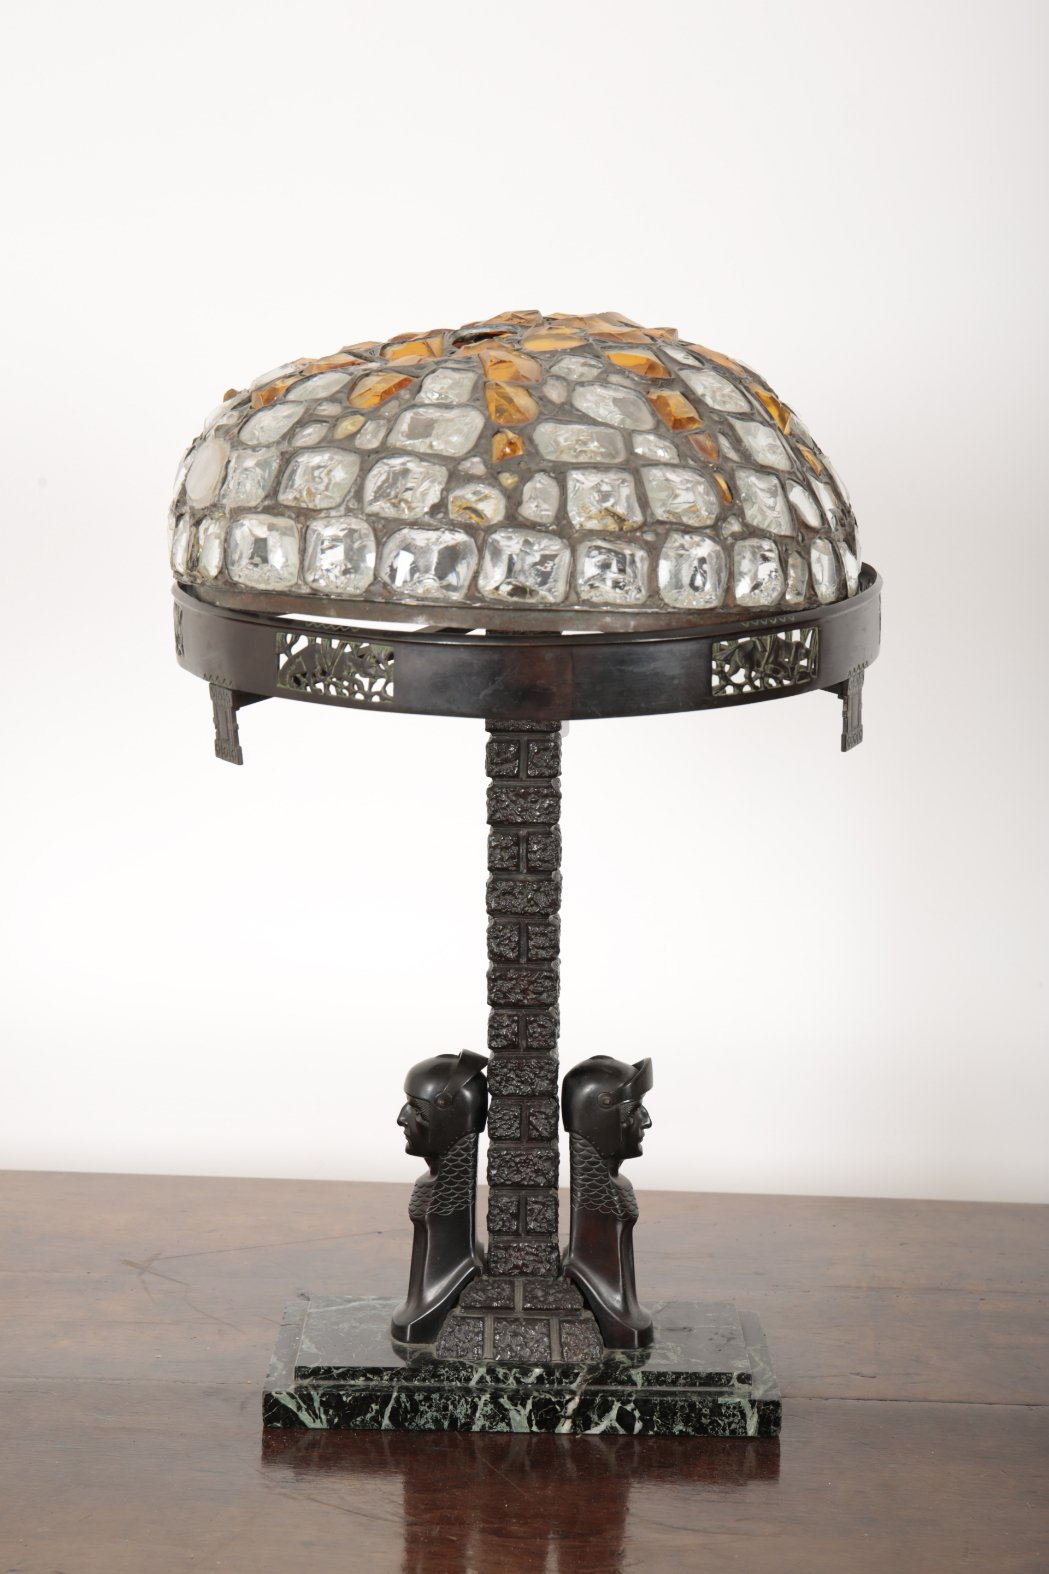 A CONTINENTAL ARTS AND CRAFTS BRONZE TABLE LAMP